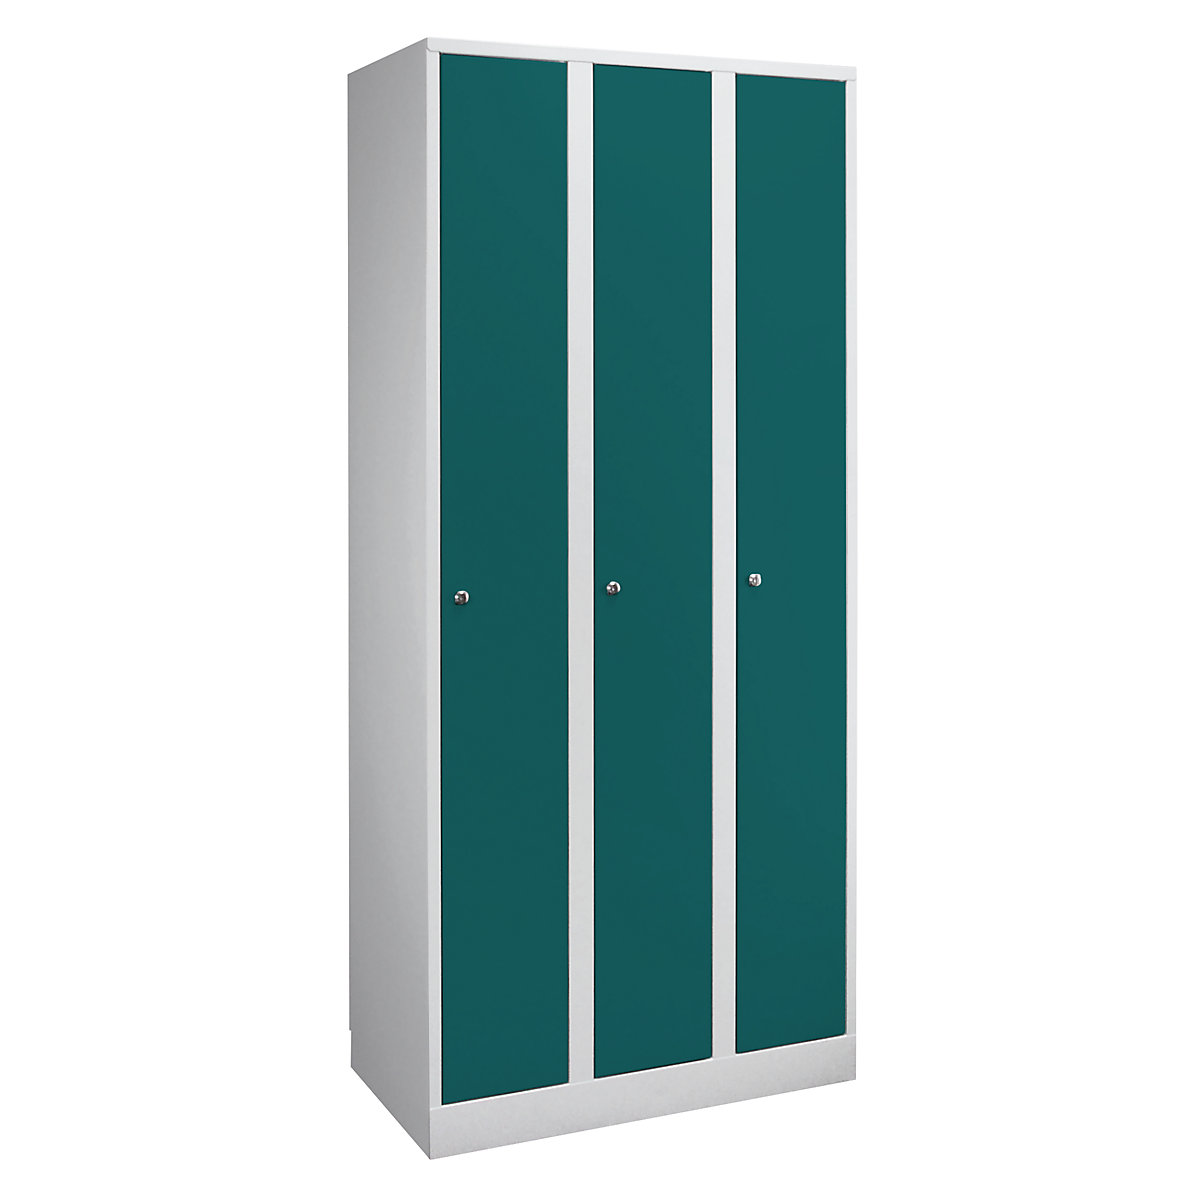 Wardrobe in practical sizes – Wolf, 3 compartments, compartment width 400 mm, light grey / opal green-6